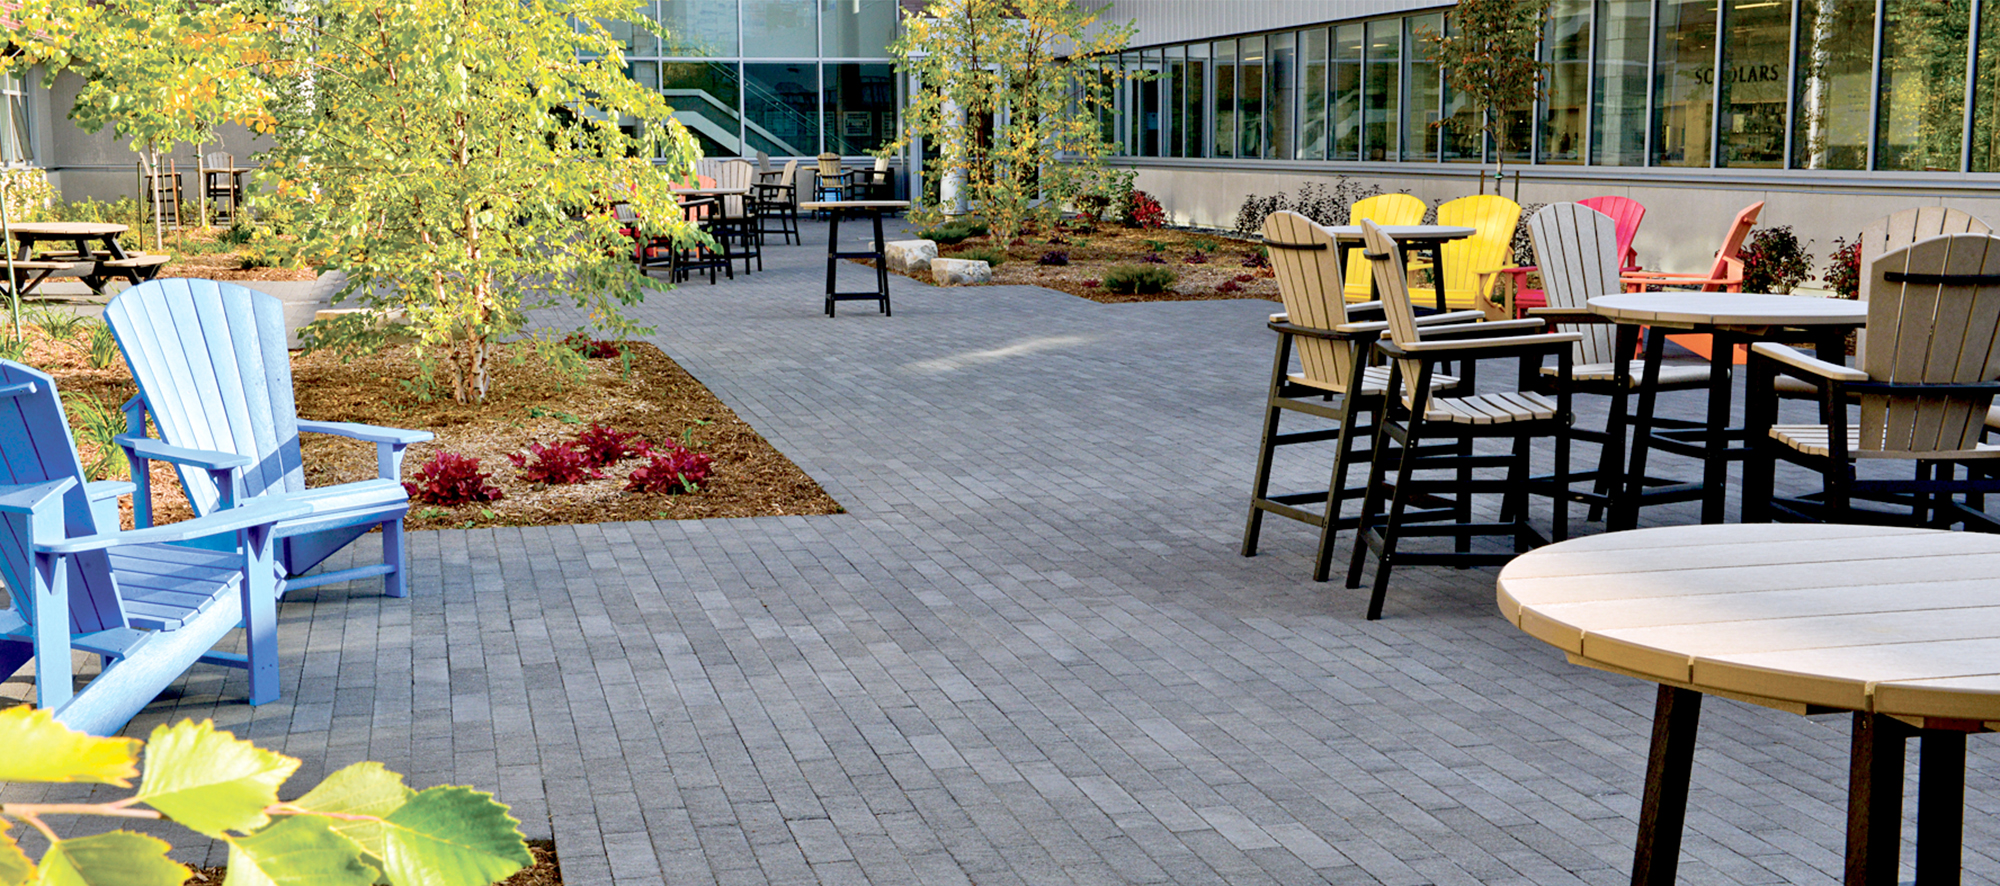 Black Il Campo pavers and modest garden beds help visually elevate surrounding colorful Adirondack chairs and beige tables.